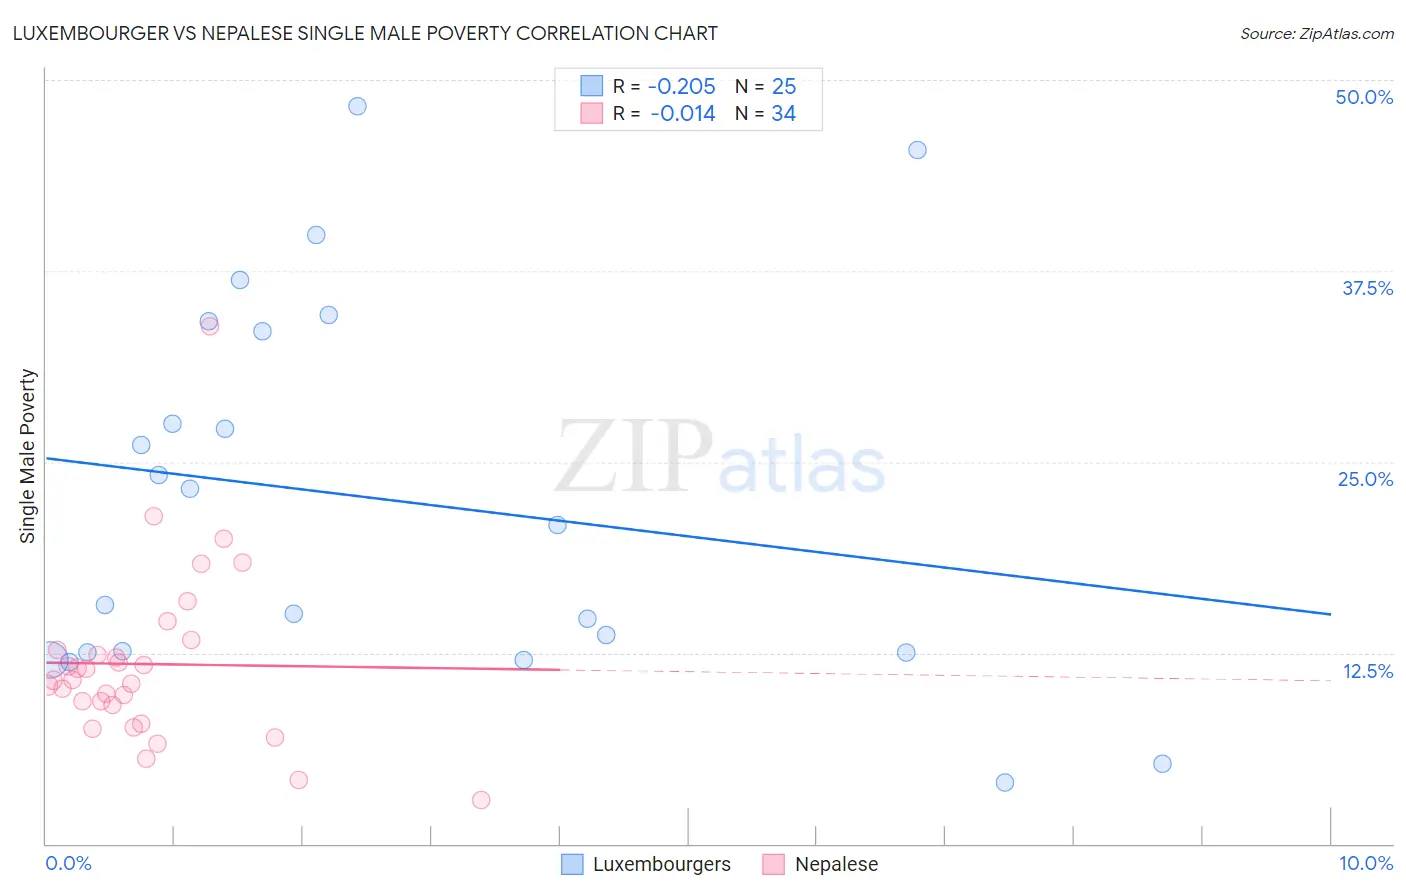 Luxembourger vs Nepalese Single Male Poverty